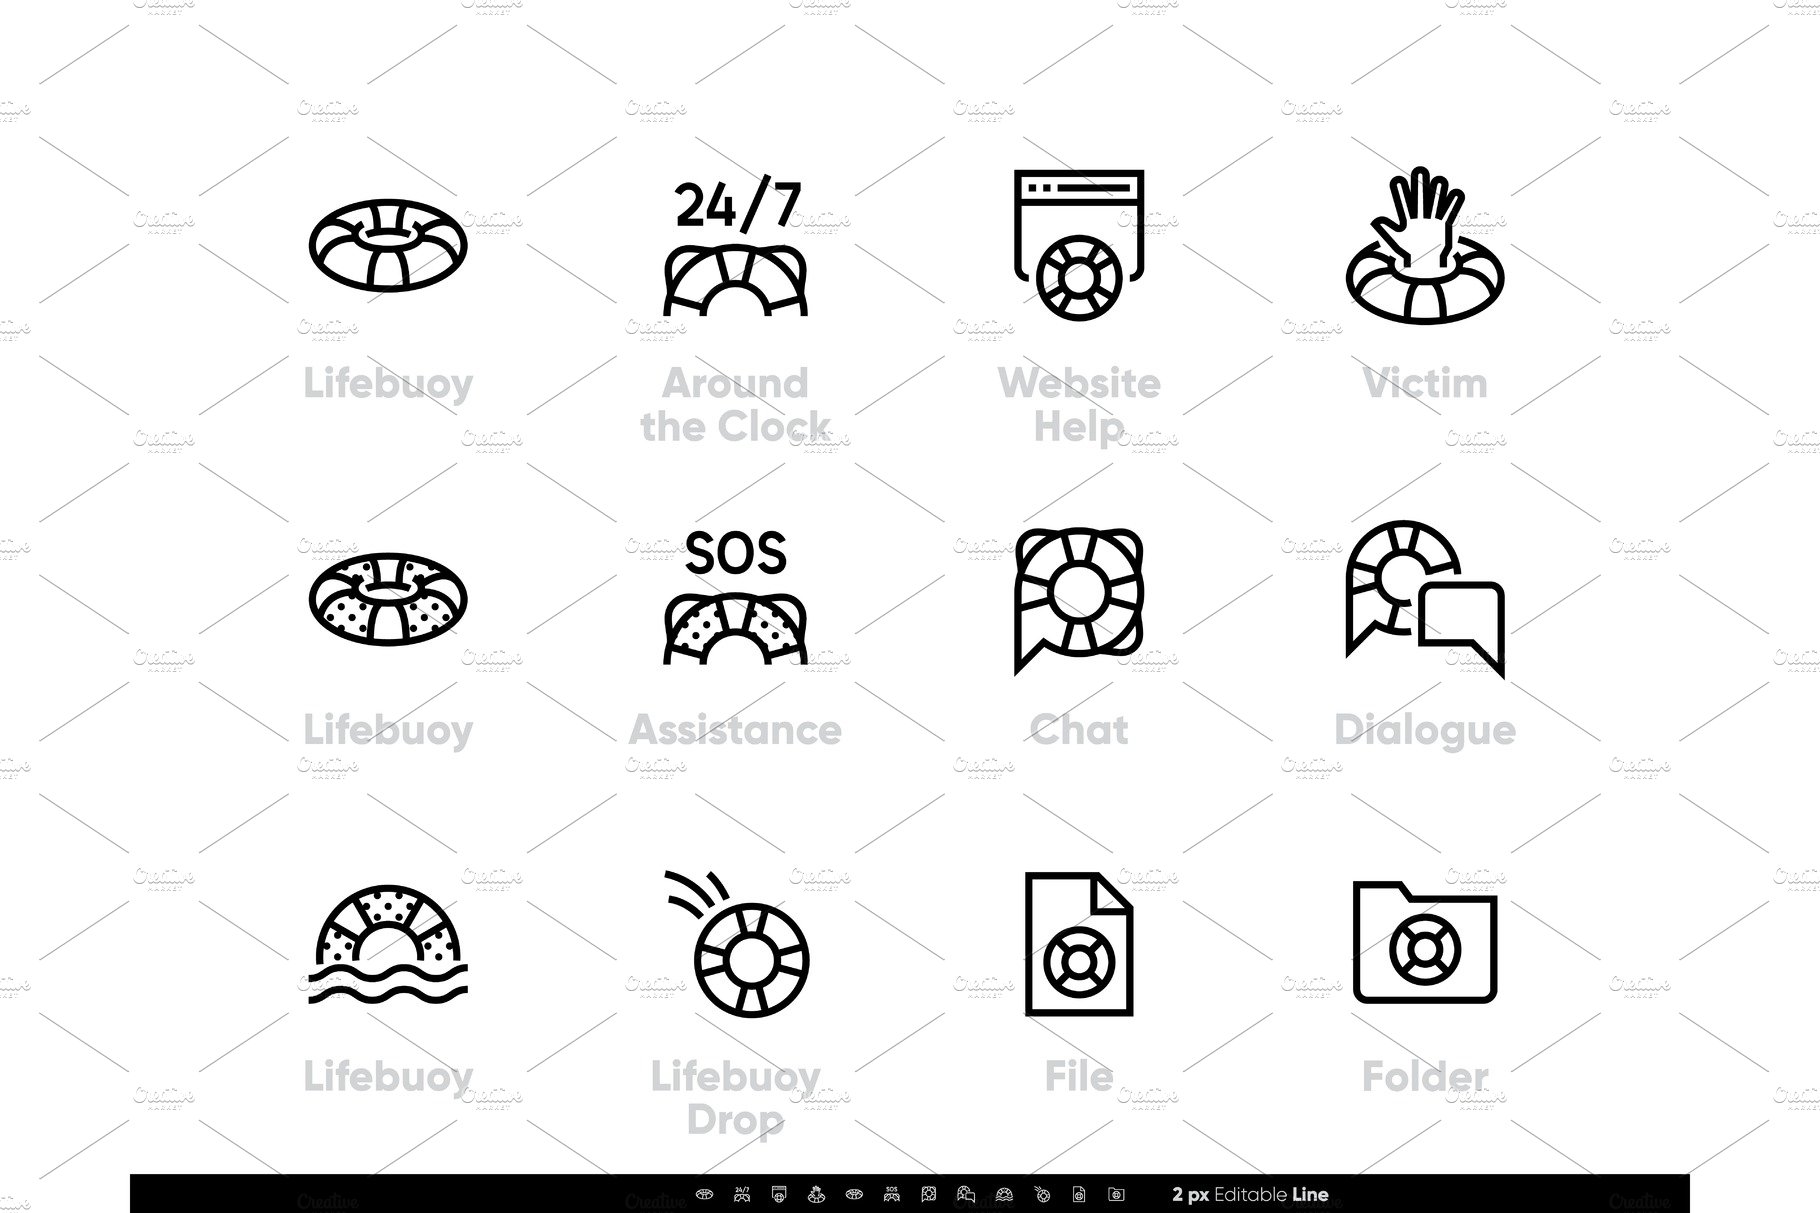 Support Service icons. Lifebuoy, SOS cover image.